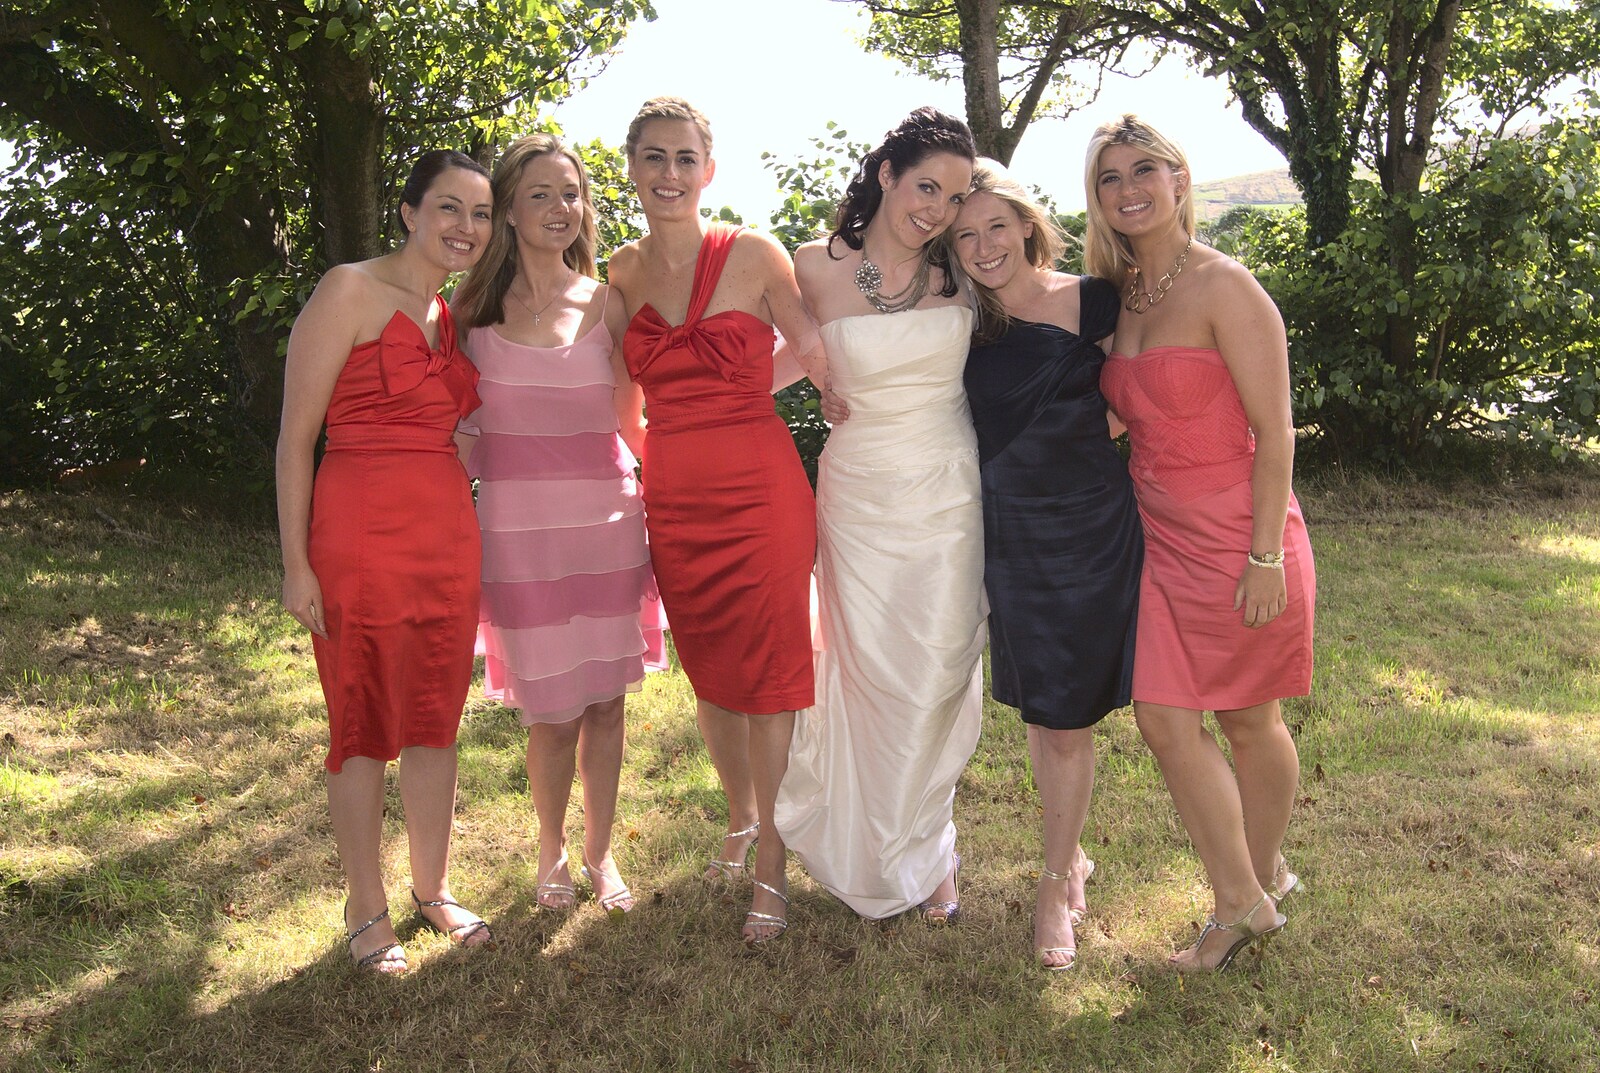 The bride and bridesmaids from Julie and Cameron's Wedding, Ballintaggart House, Dingle - 24th July 2009